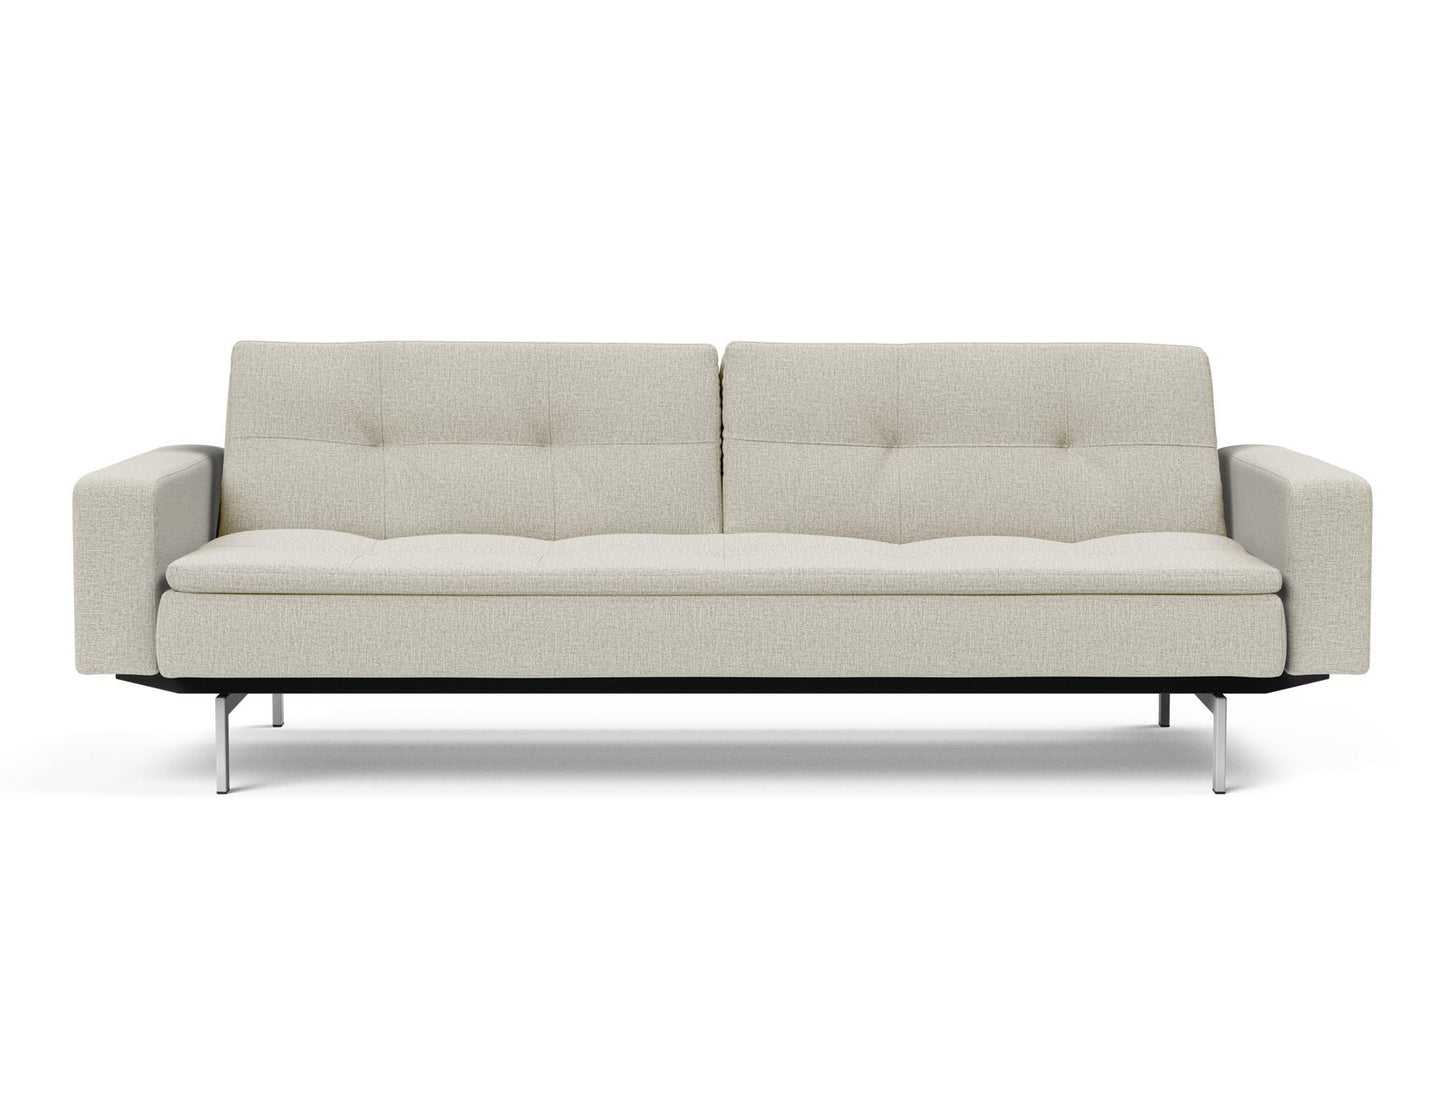 Innovation Living Dublexo Sofa Bed Stainless Steel with Arms